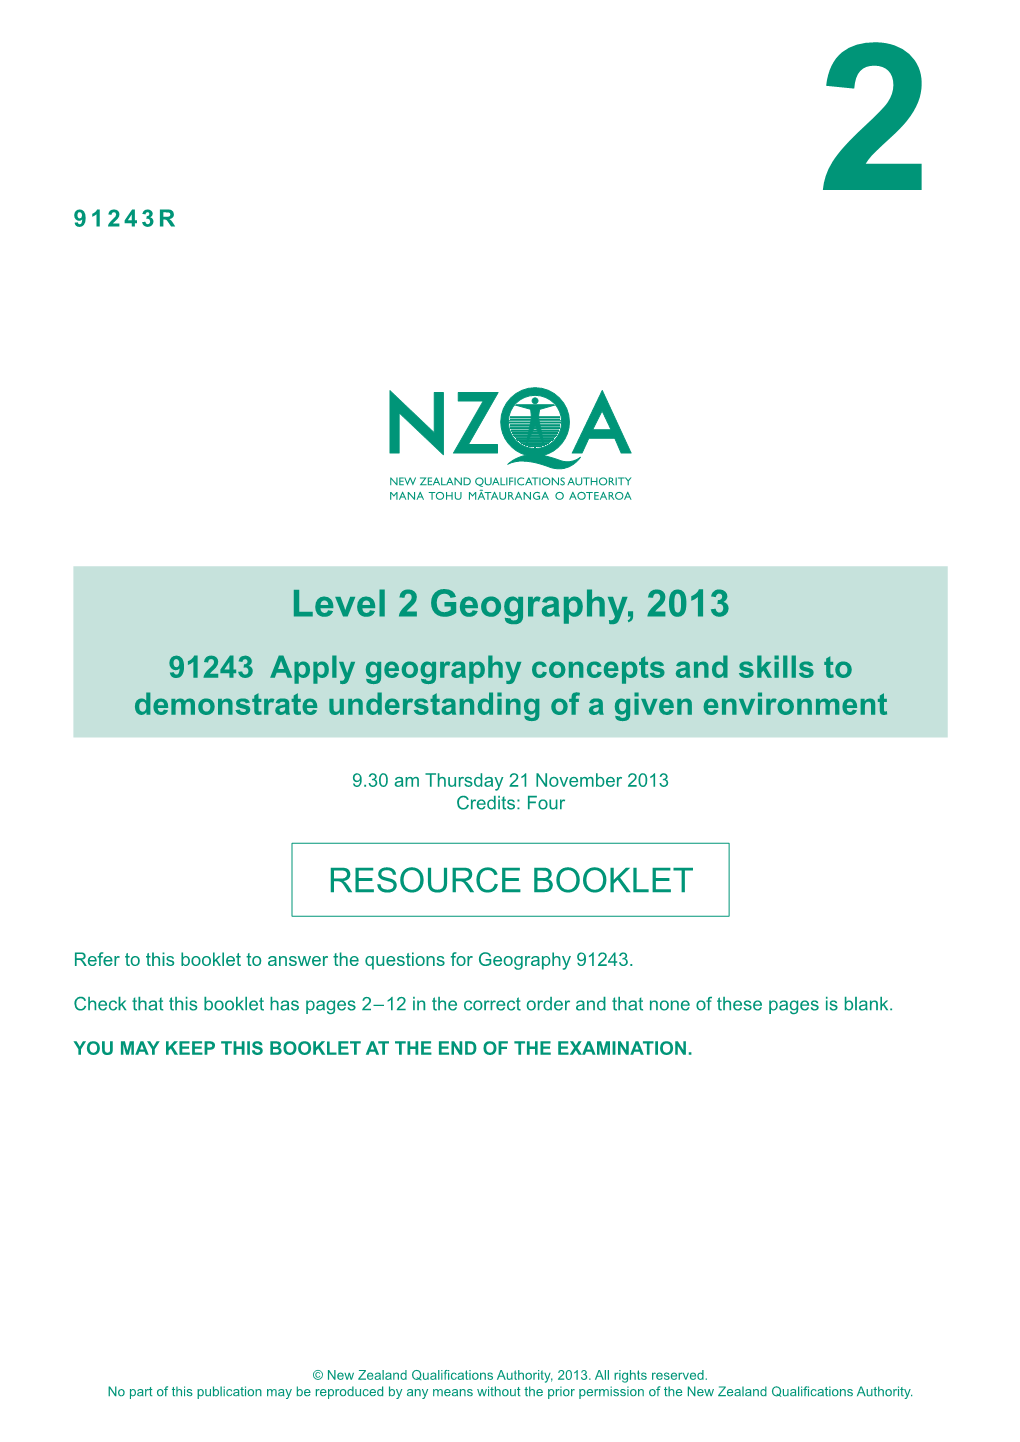 Level 2 Geography (91243) 2013